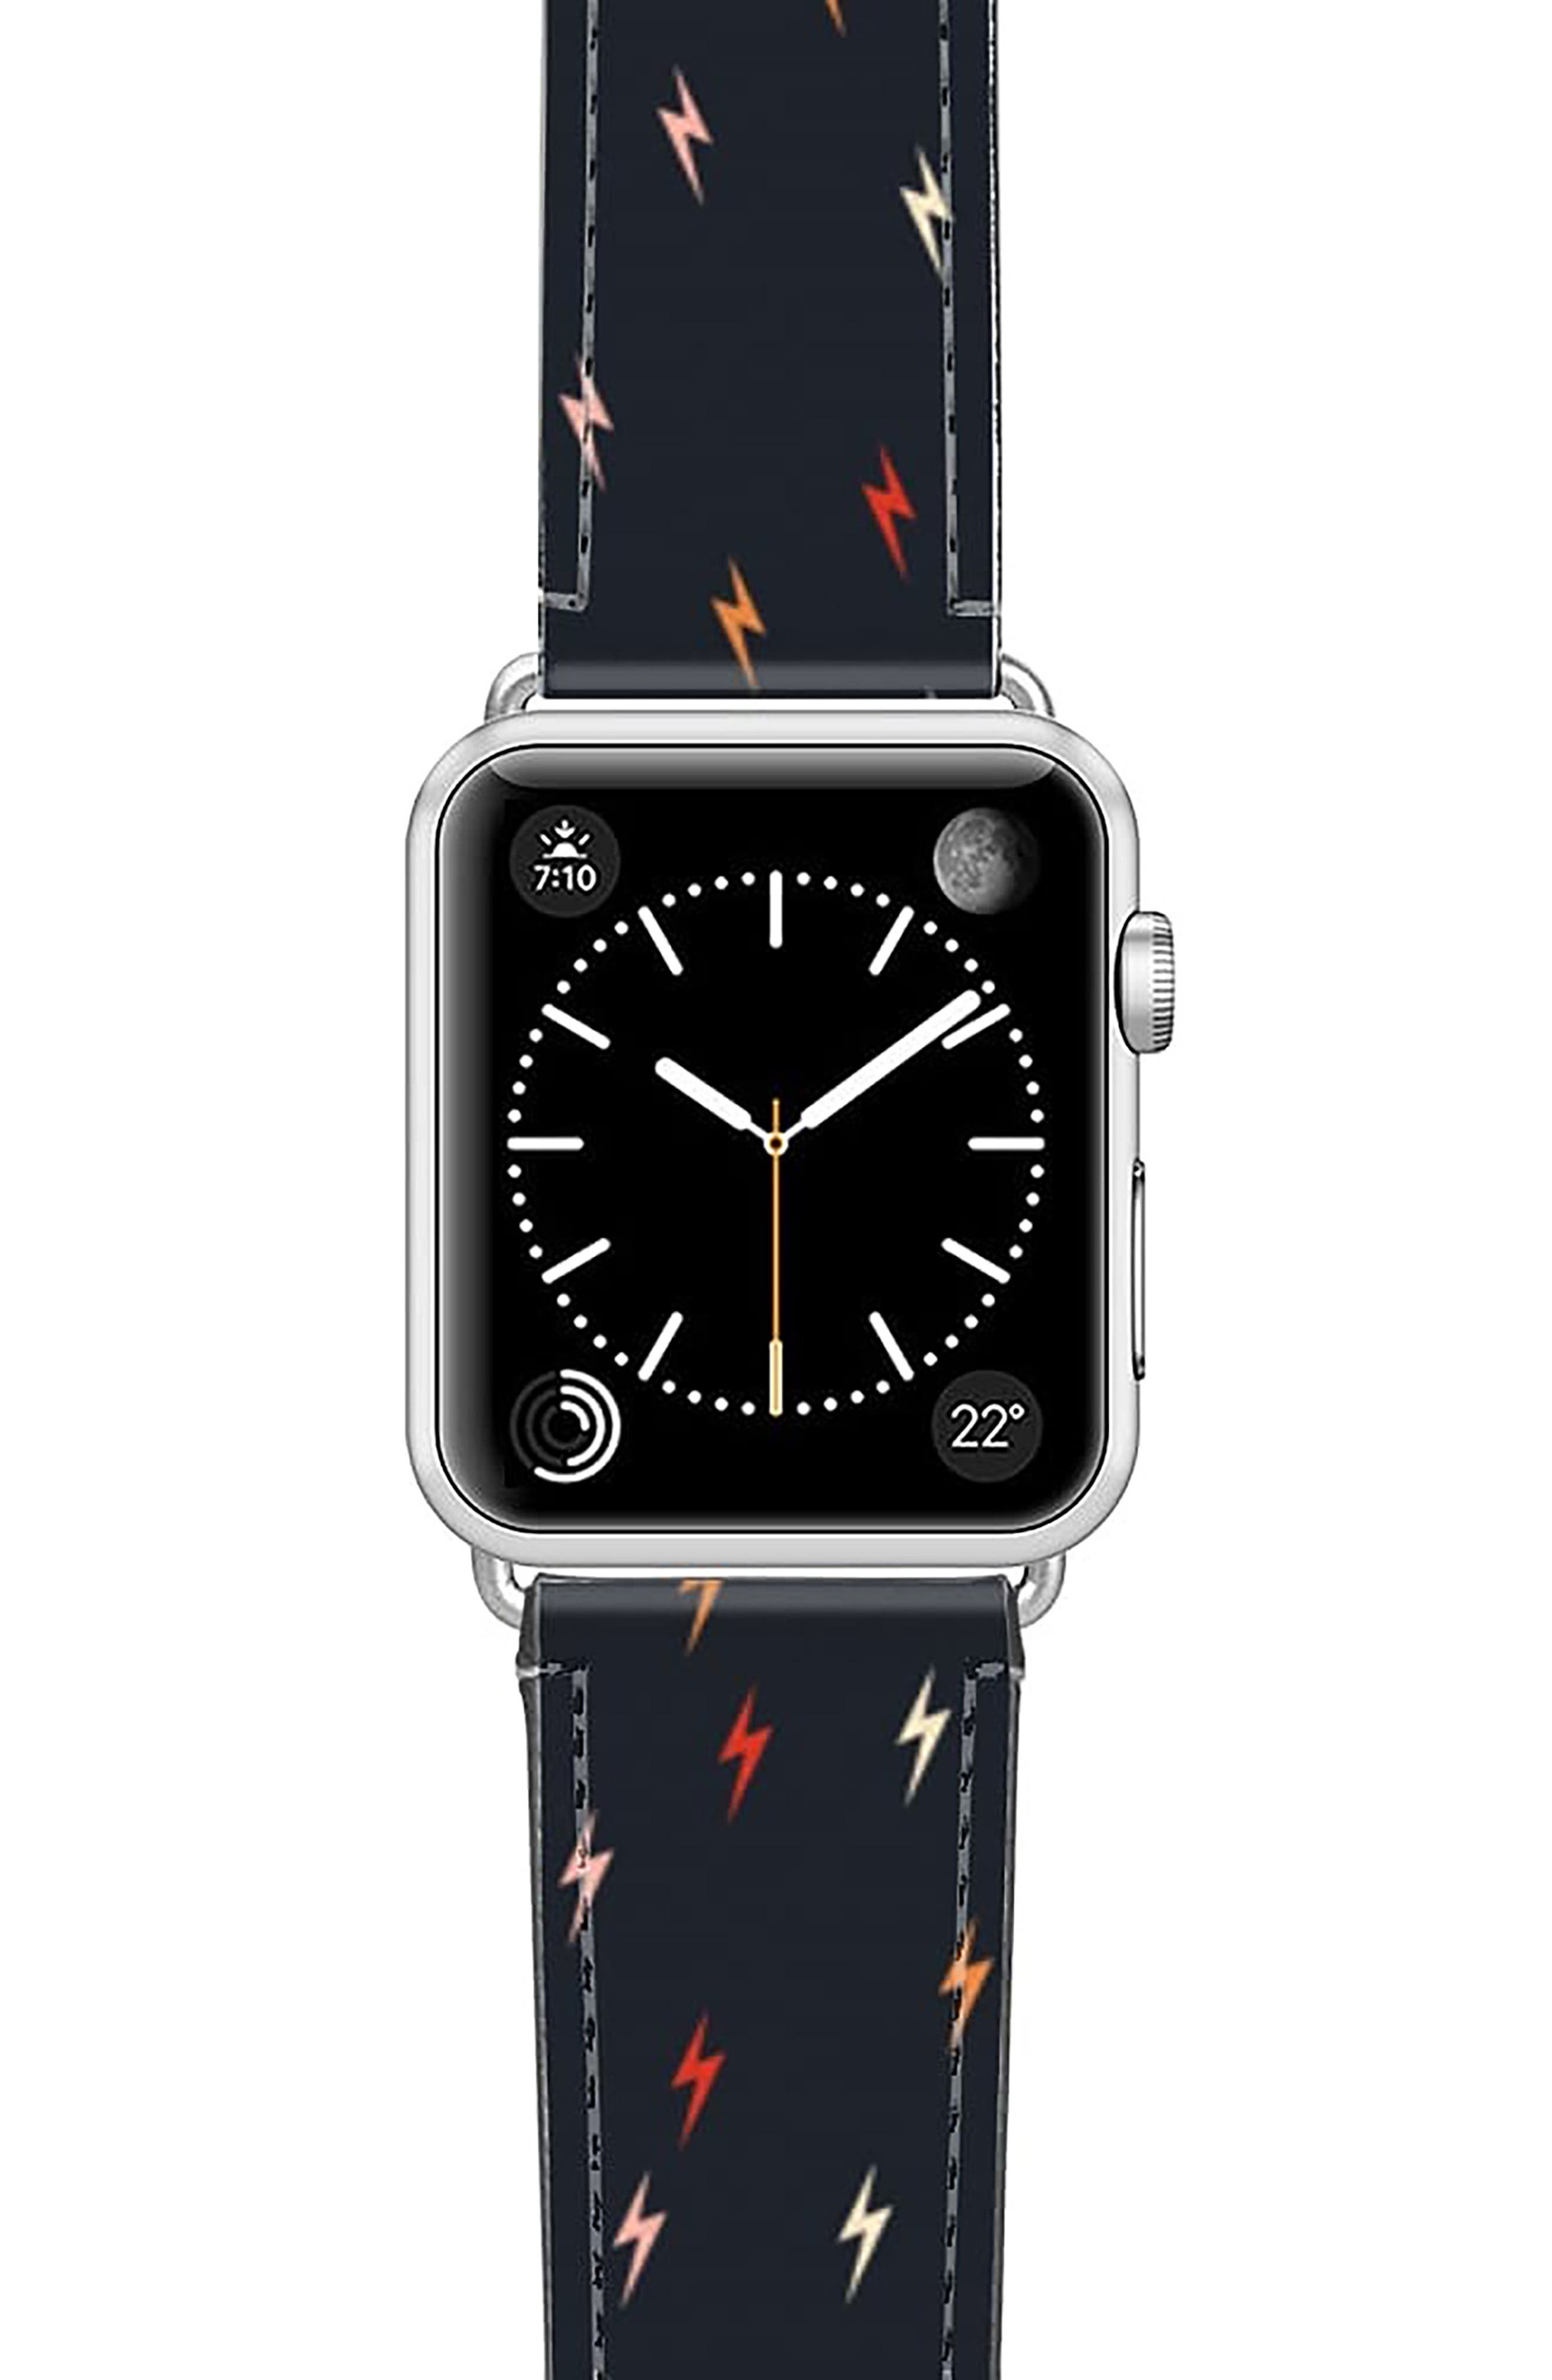 CASETiFY Pass the Bolt Saffiano Faux Leather Apple Watch Band in Black/Silver at Nordstrom